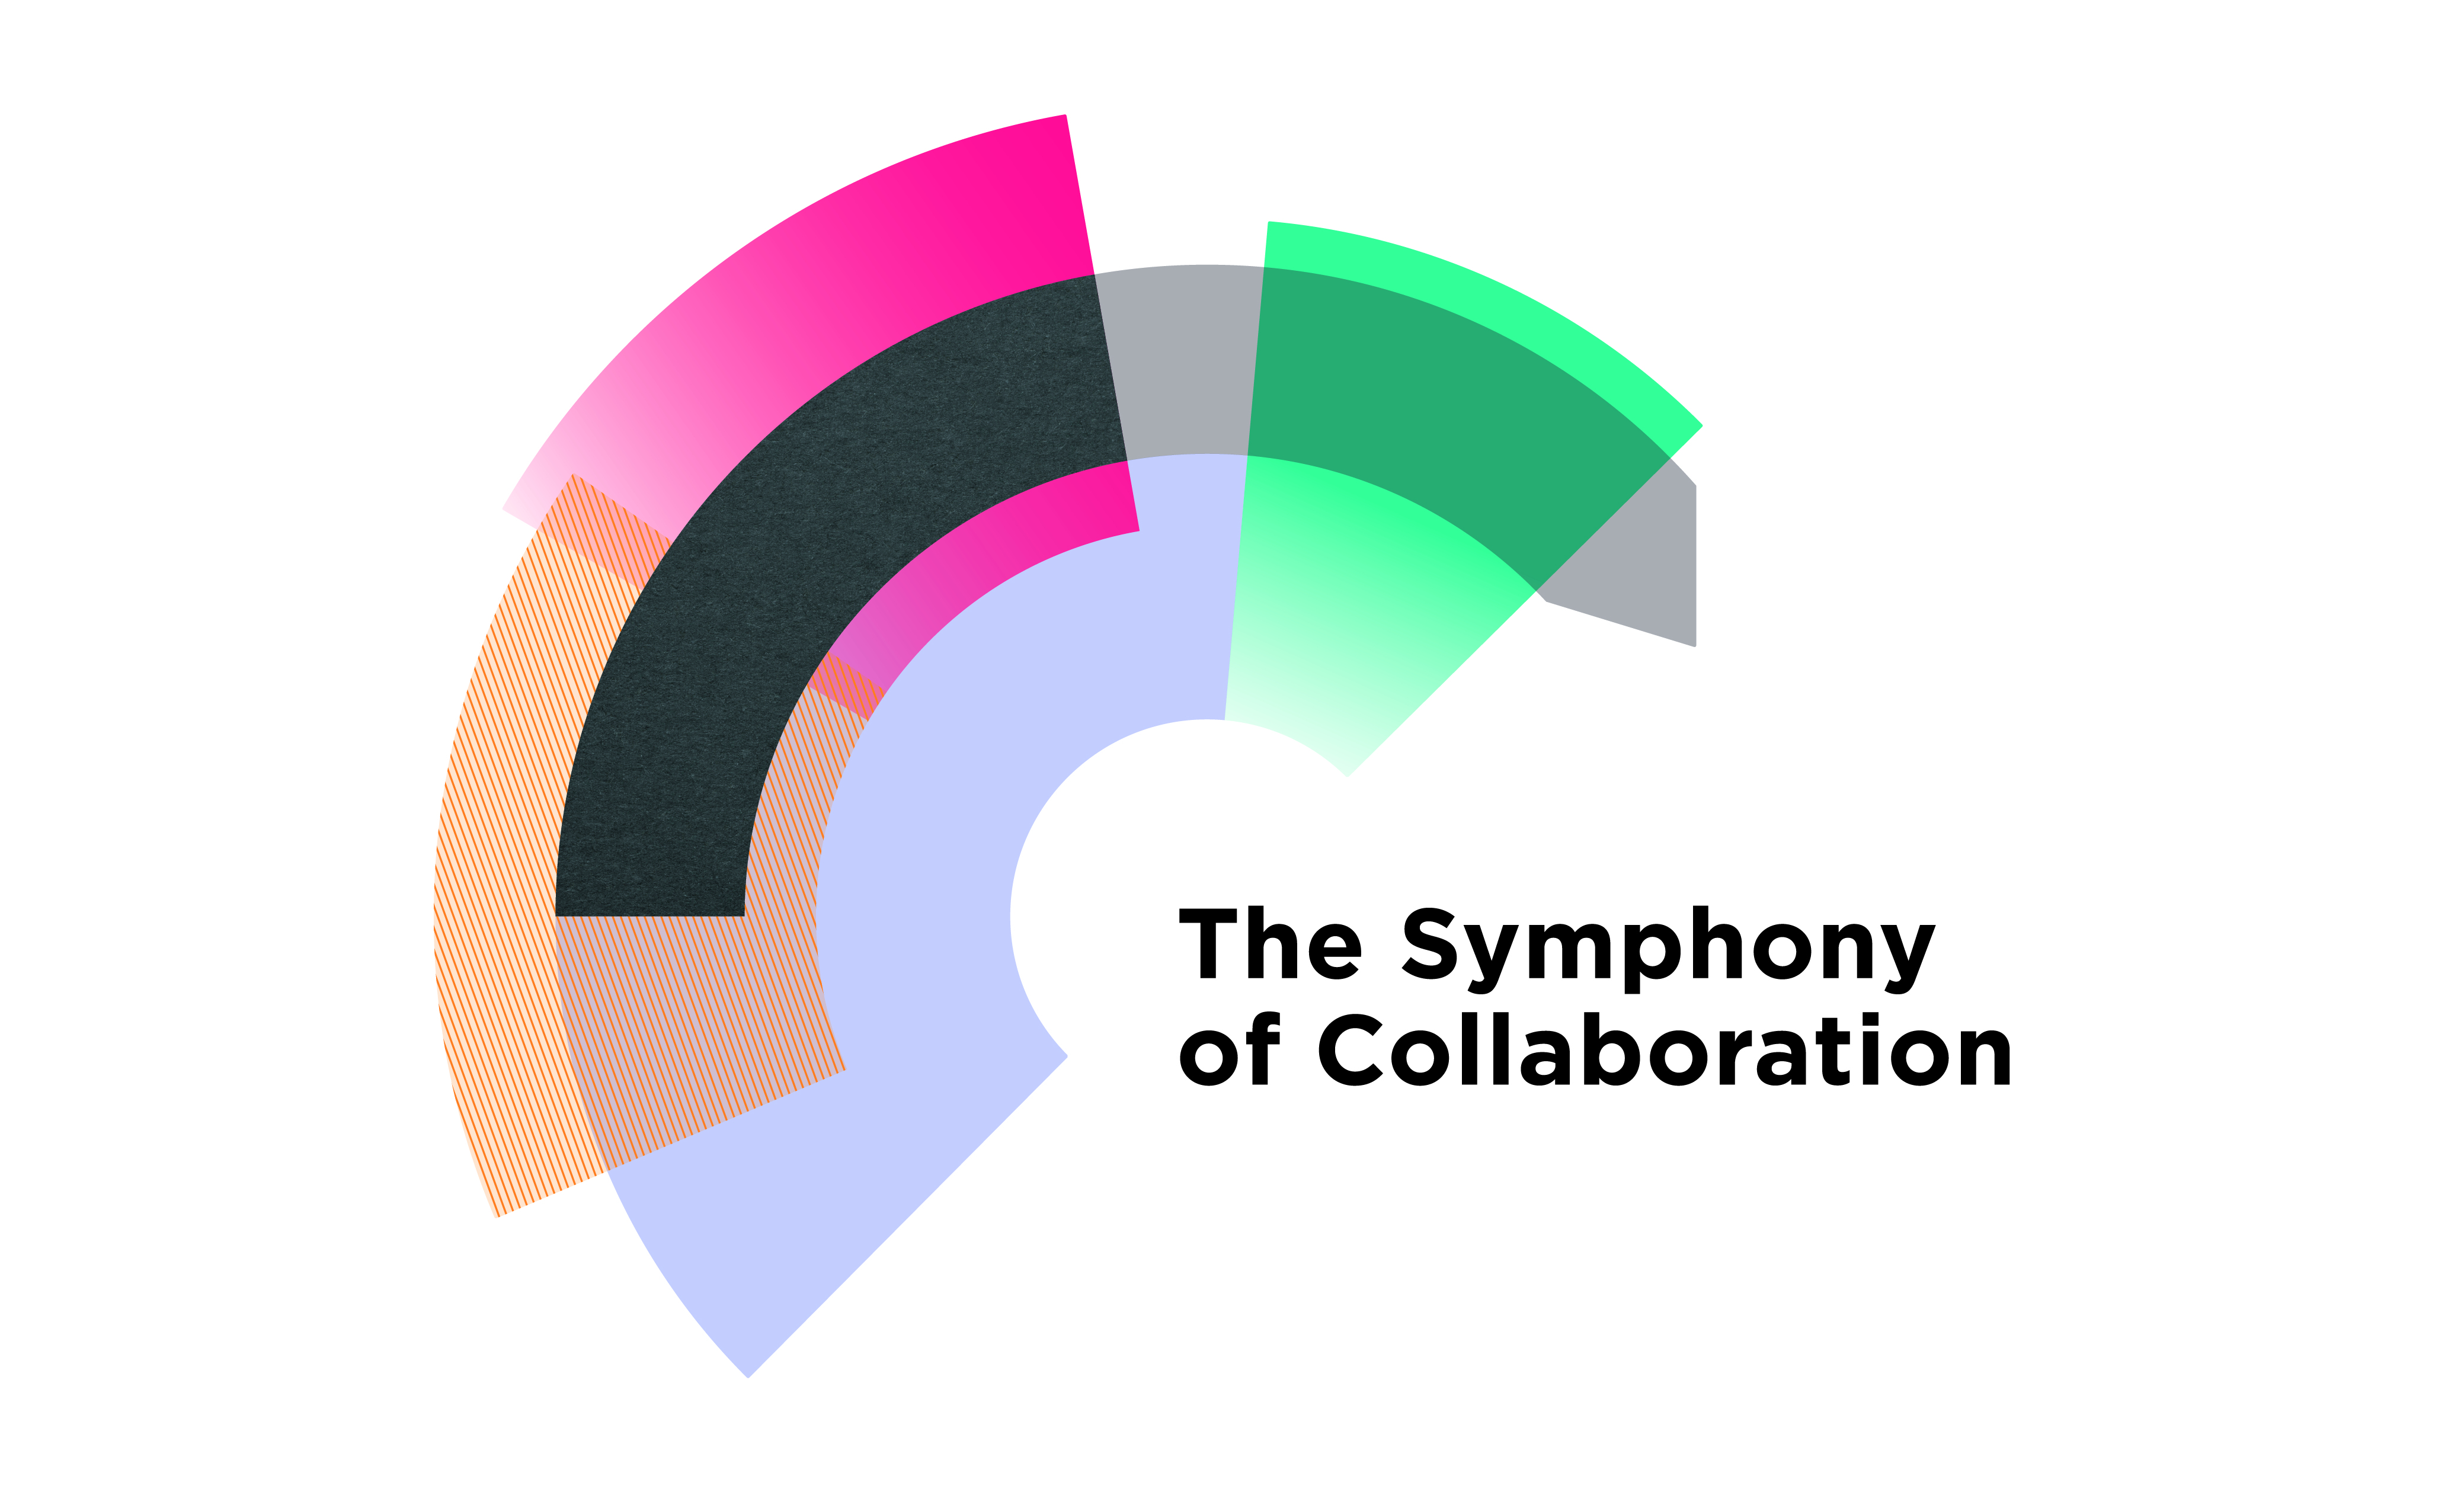 With the slogan "The Symphony of Collaboration" Clariant underlines its tailored support, agility,...